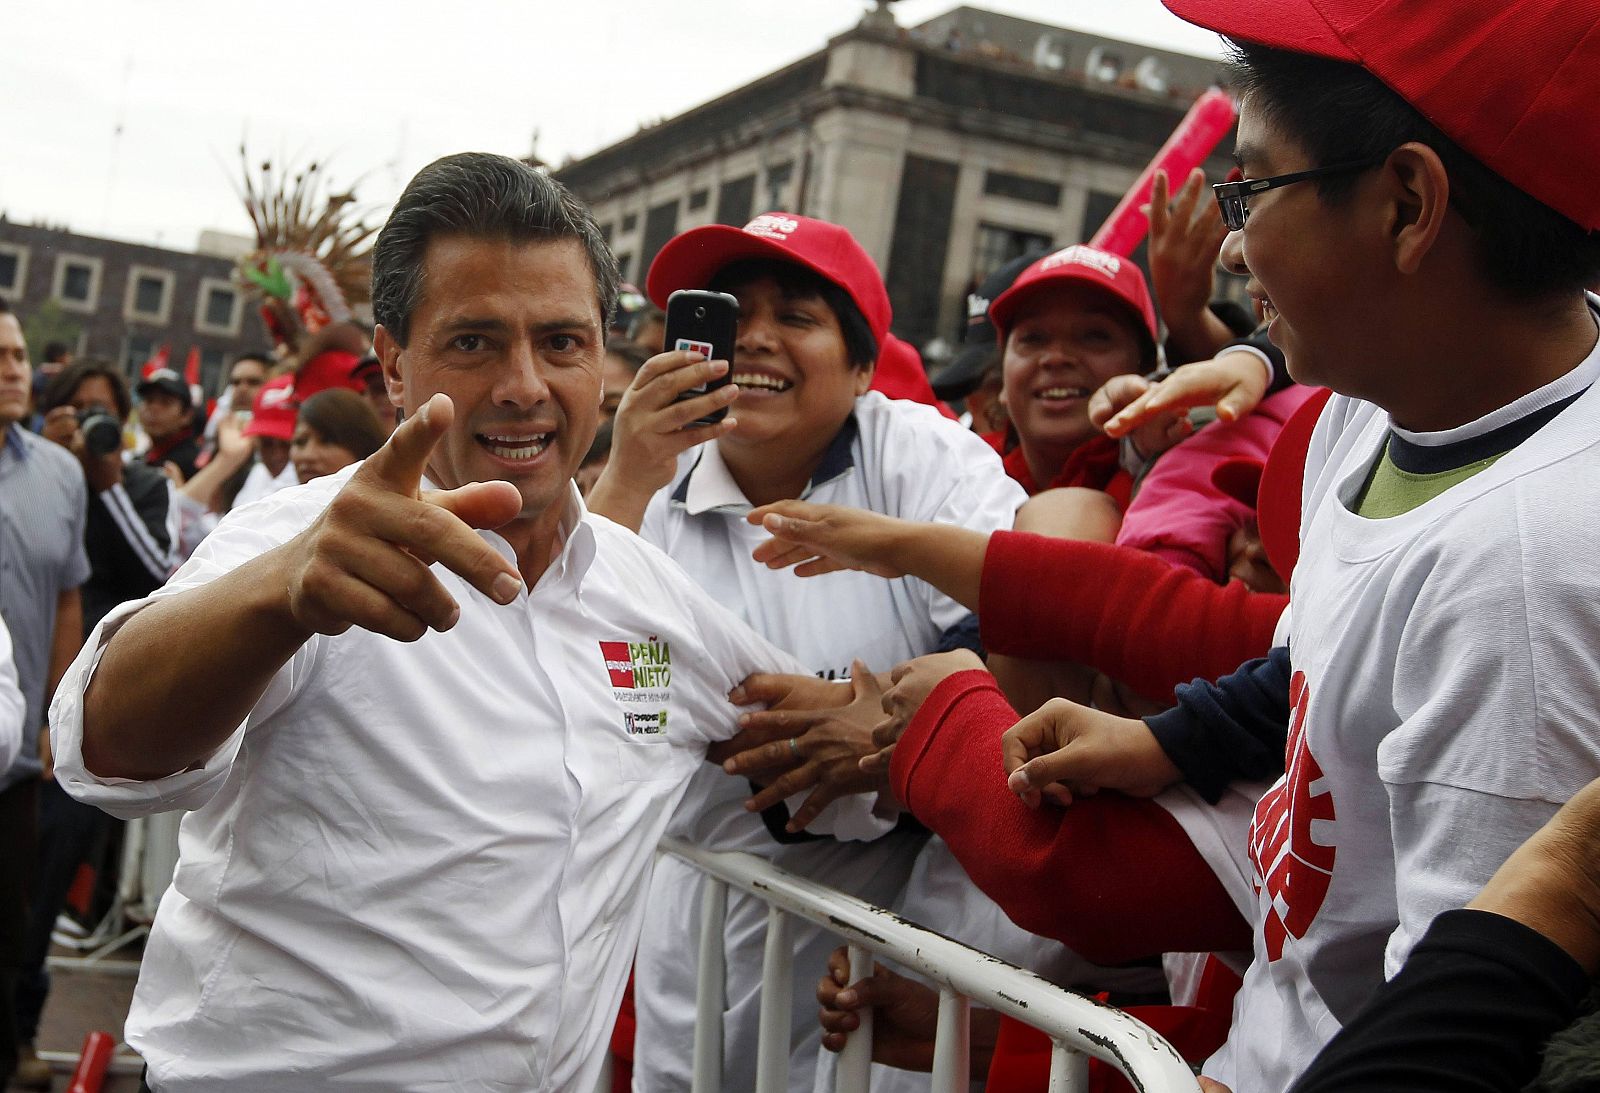 Mexican presidential front-runner Enrique Pena Nieto greets supporters at one of his last campaign rallies in Toluca